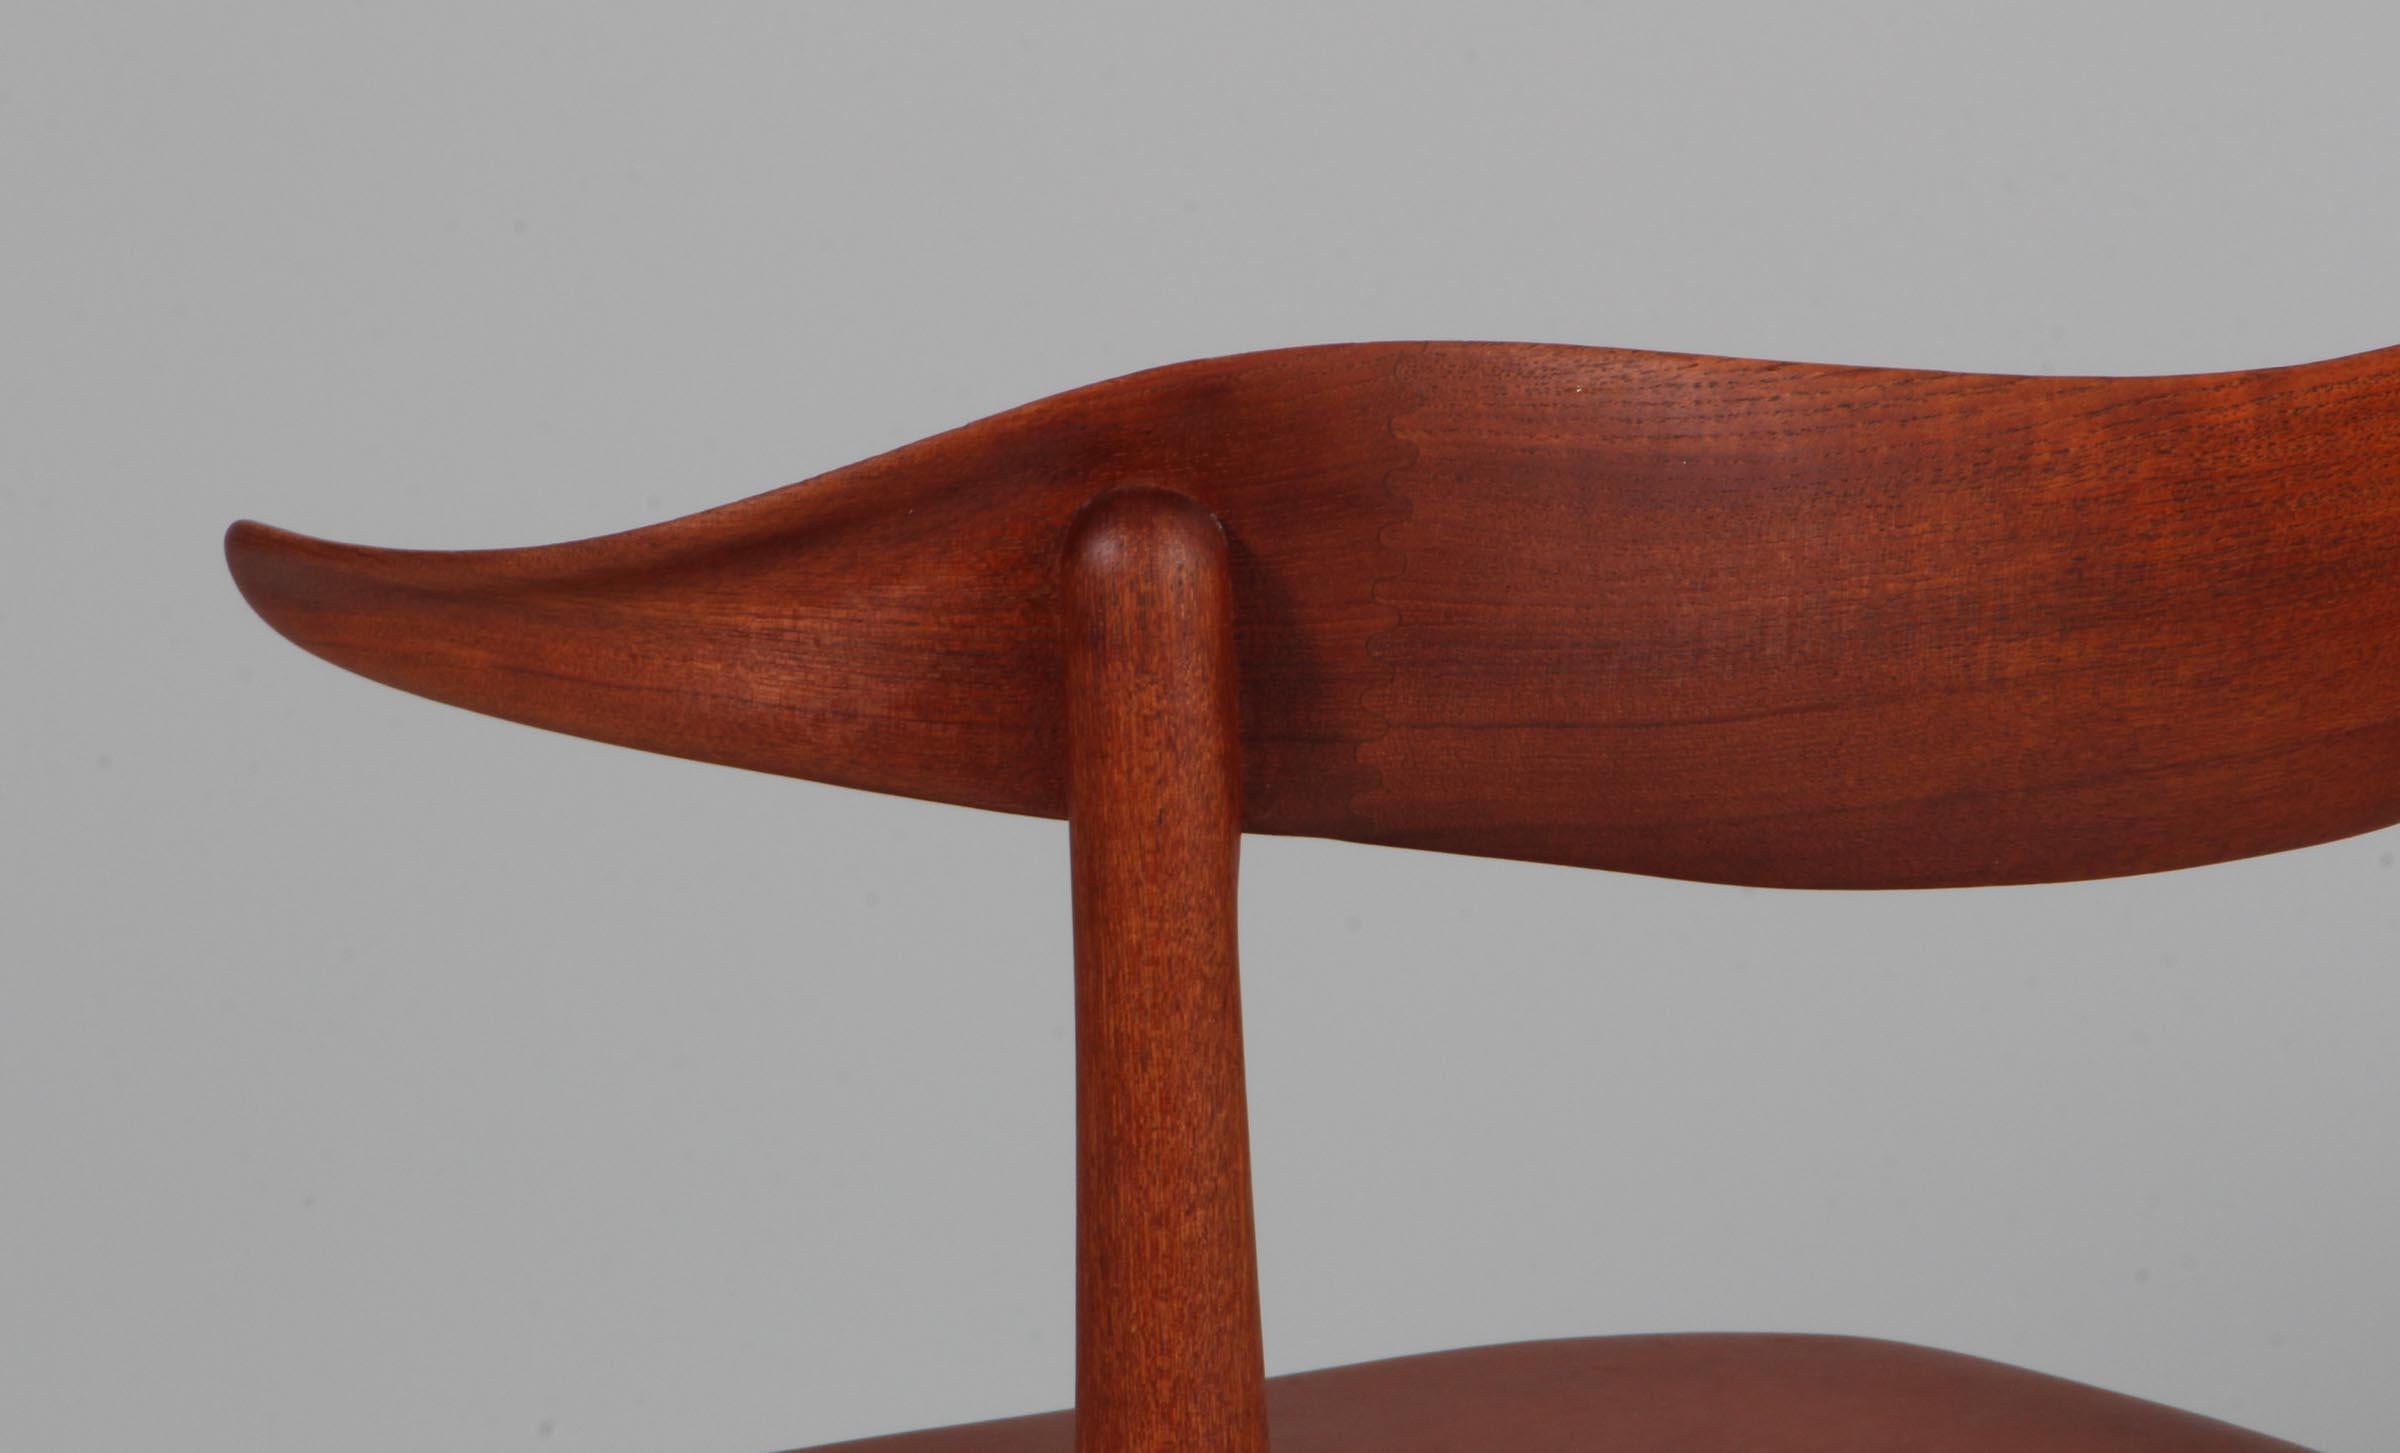 Leather Knud Færch Cowhorn Arm Chairs, 1960s, teak For Sale